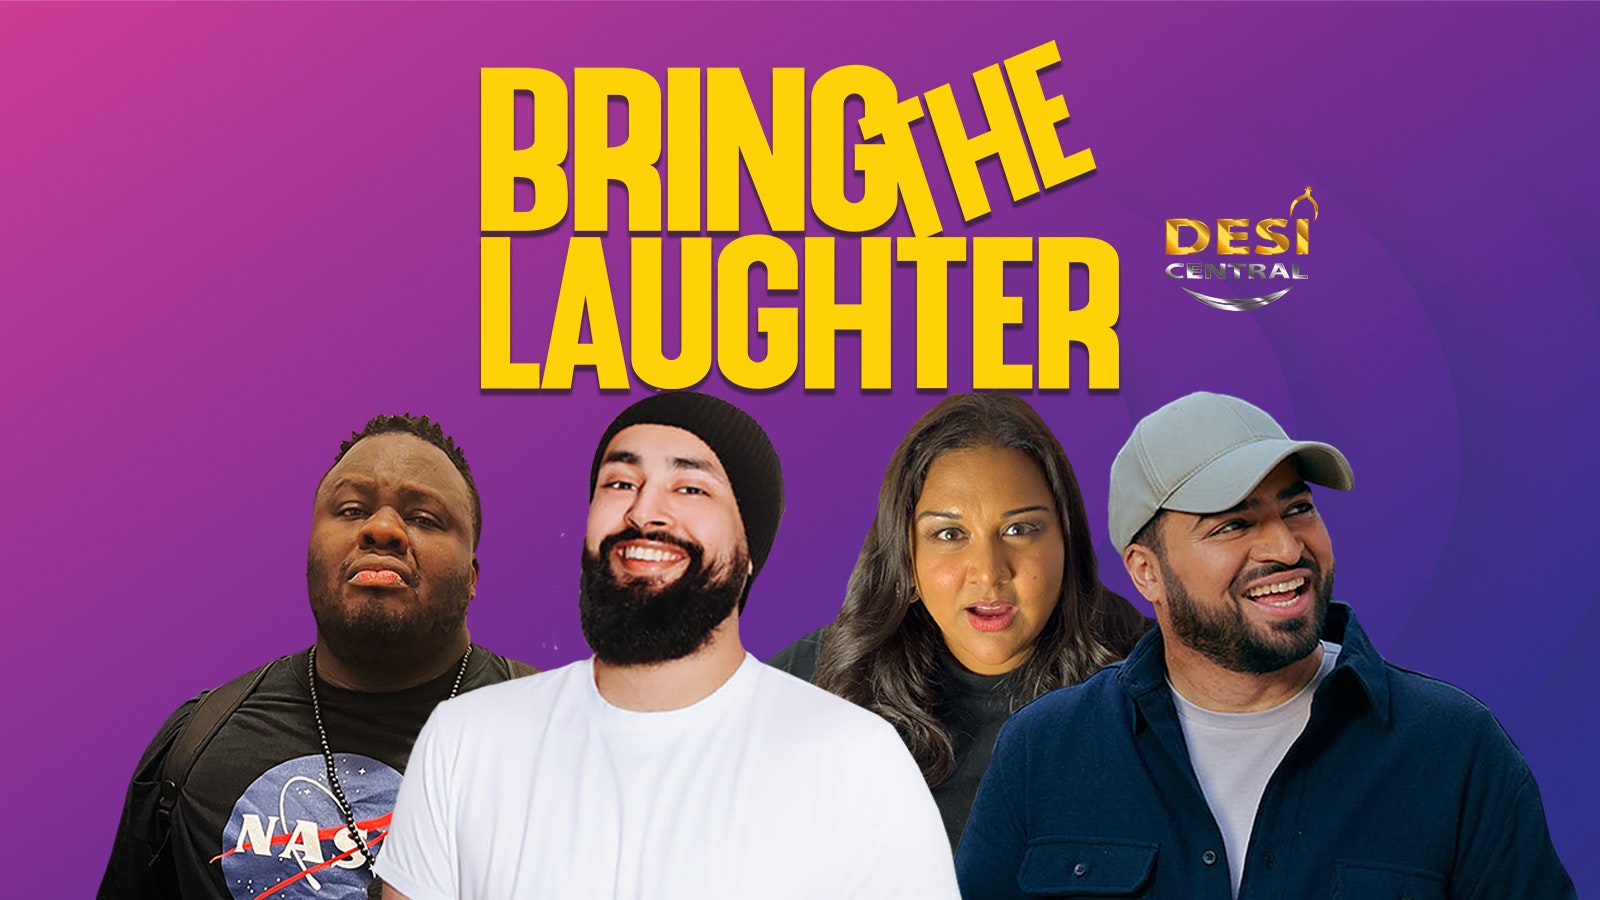 Bring The Laughter – Ipswich